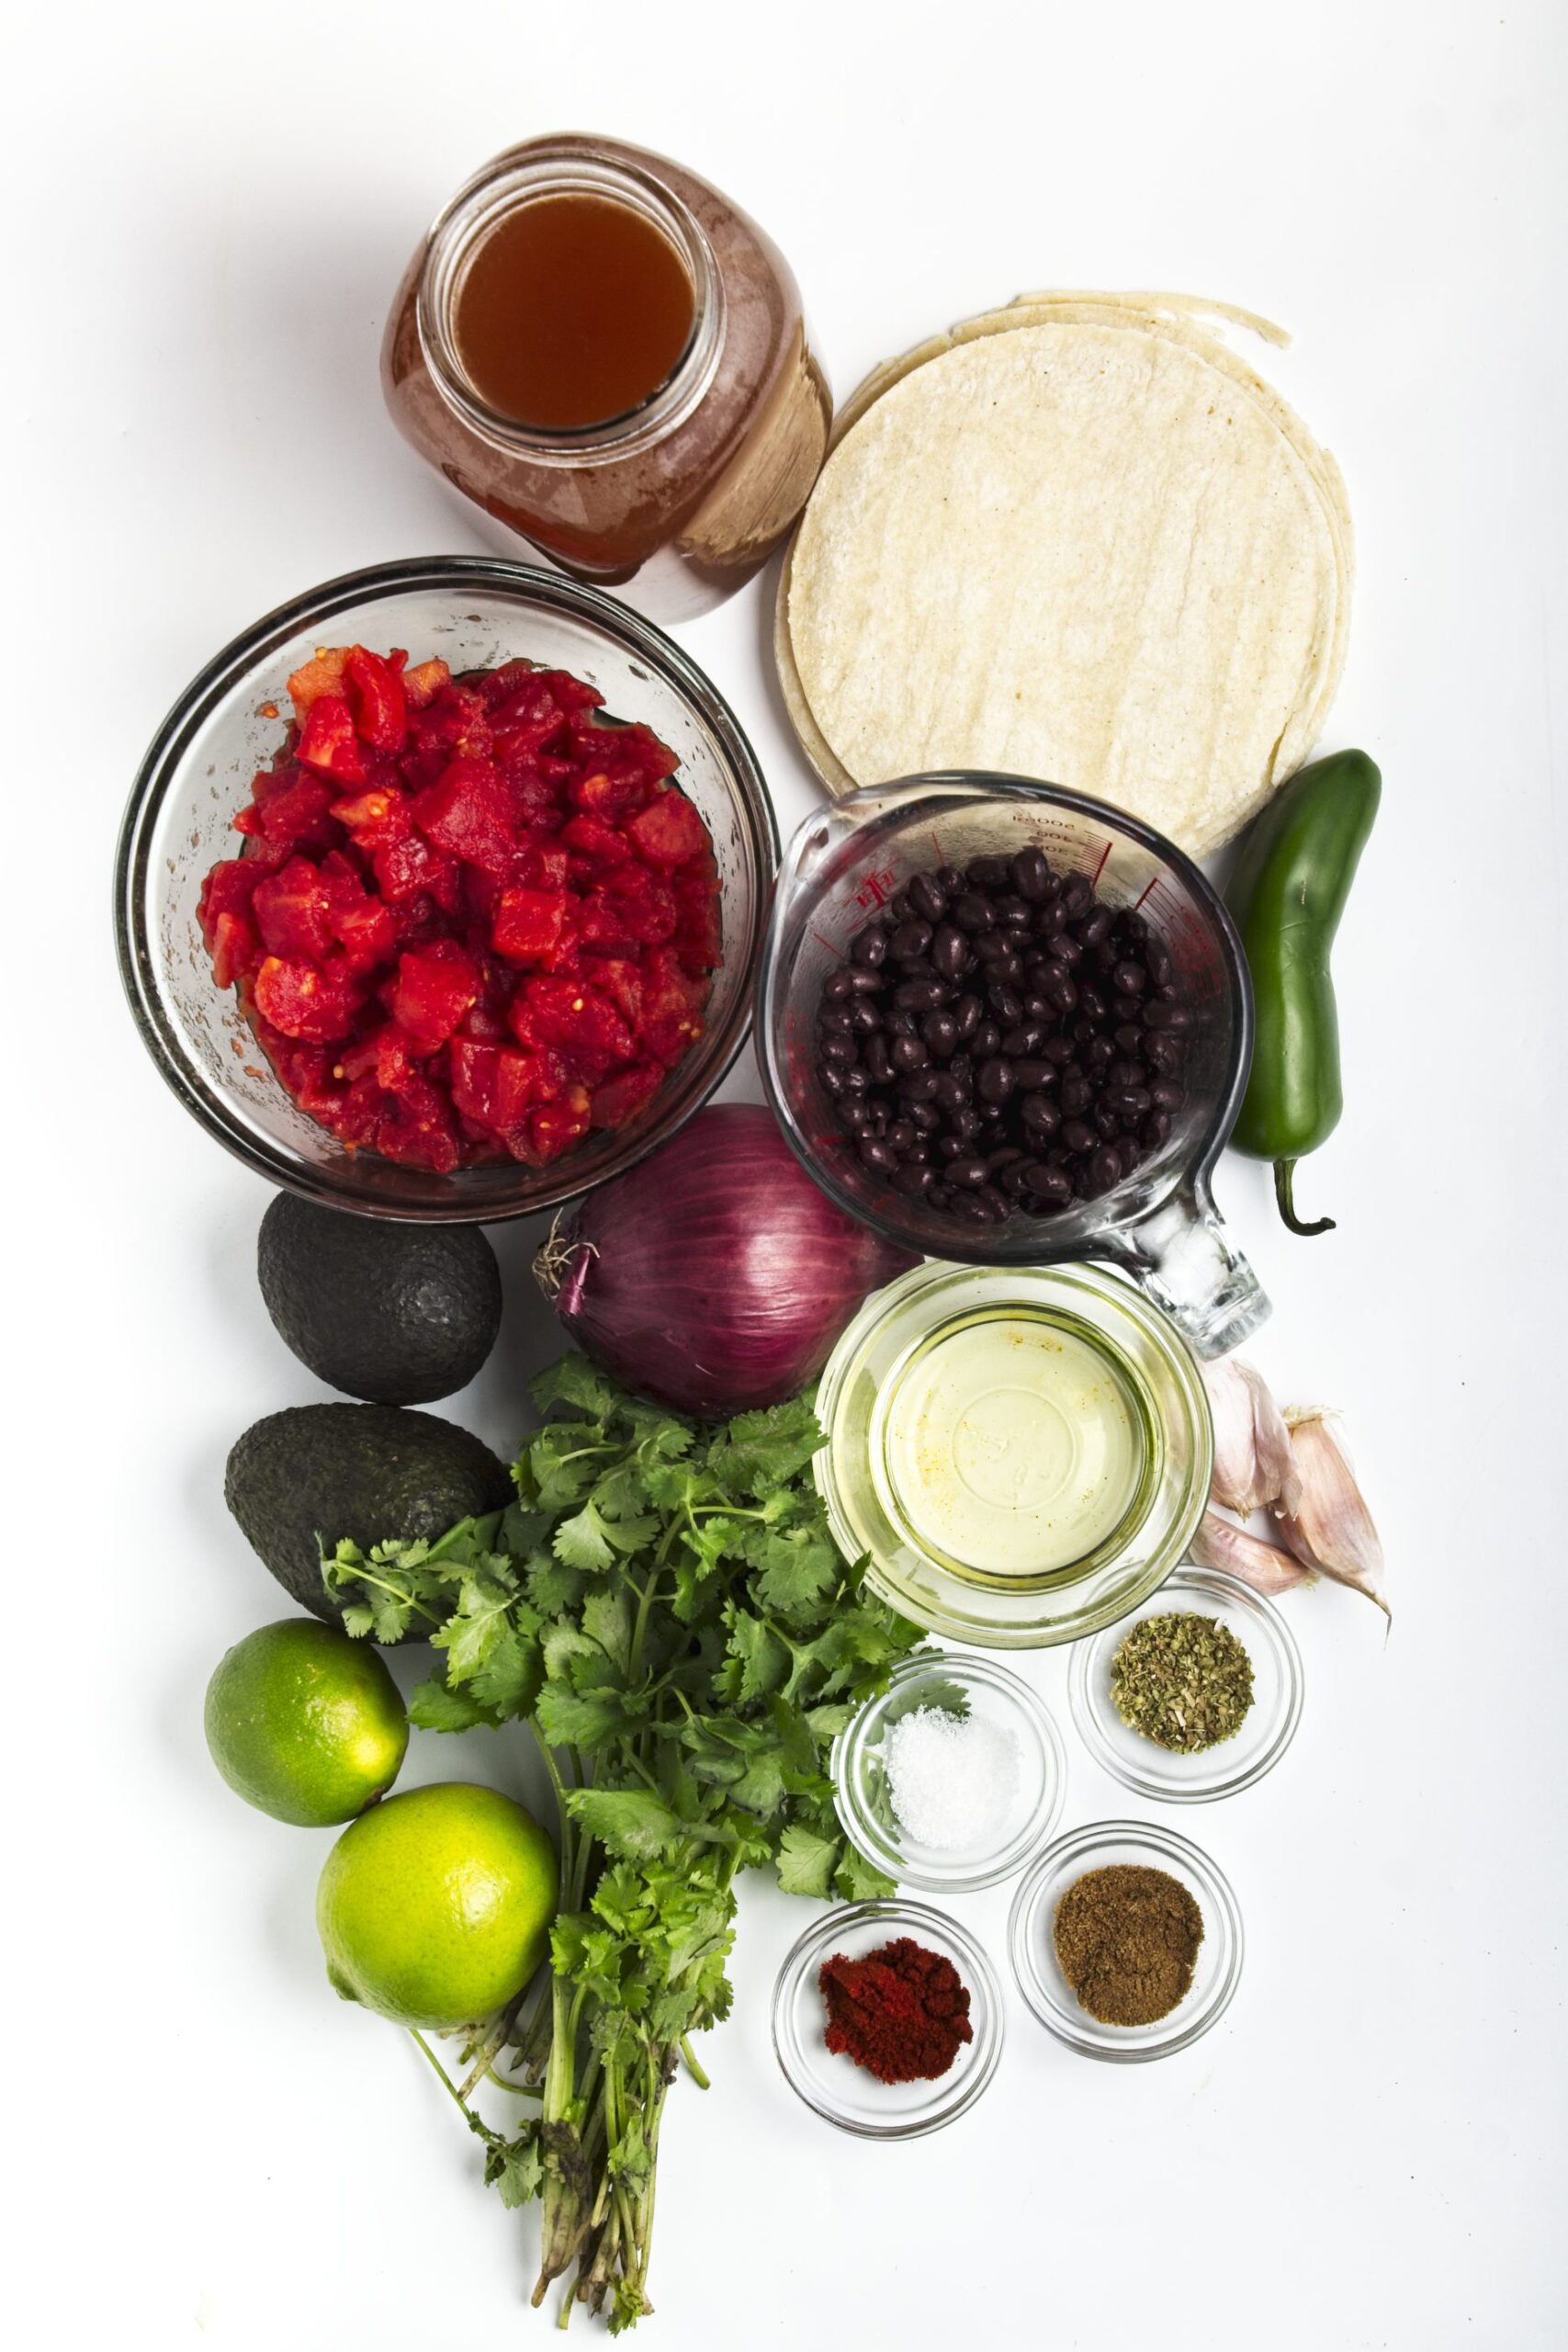 All of the ingredients for vegetarian tortilla soup sitting together